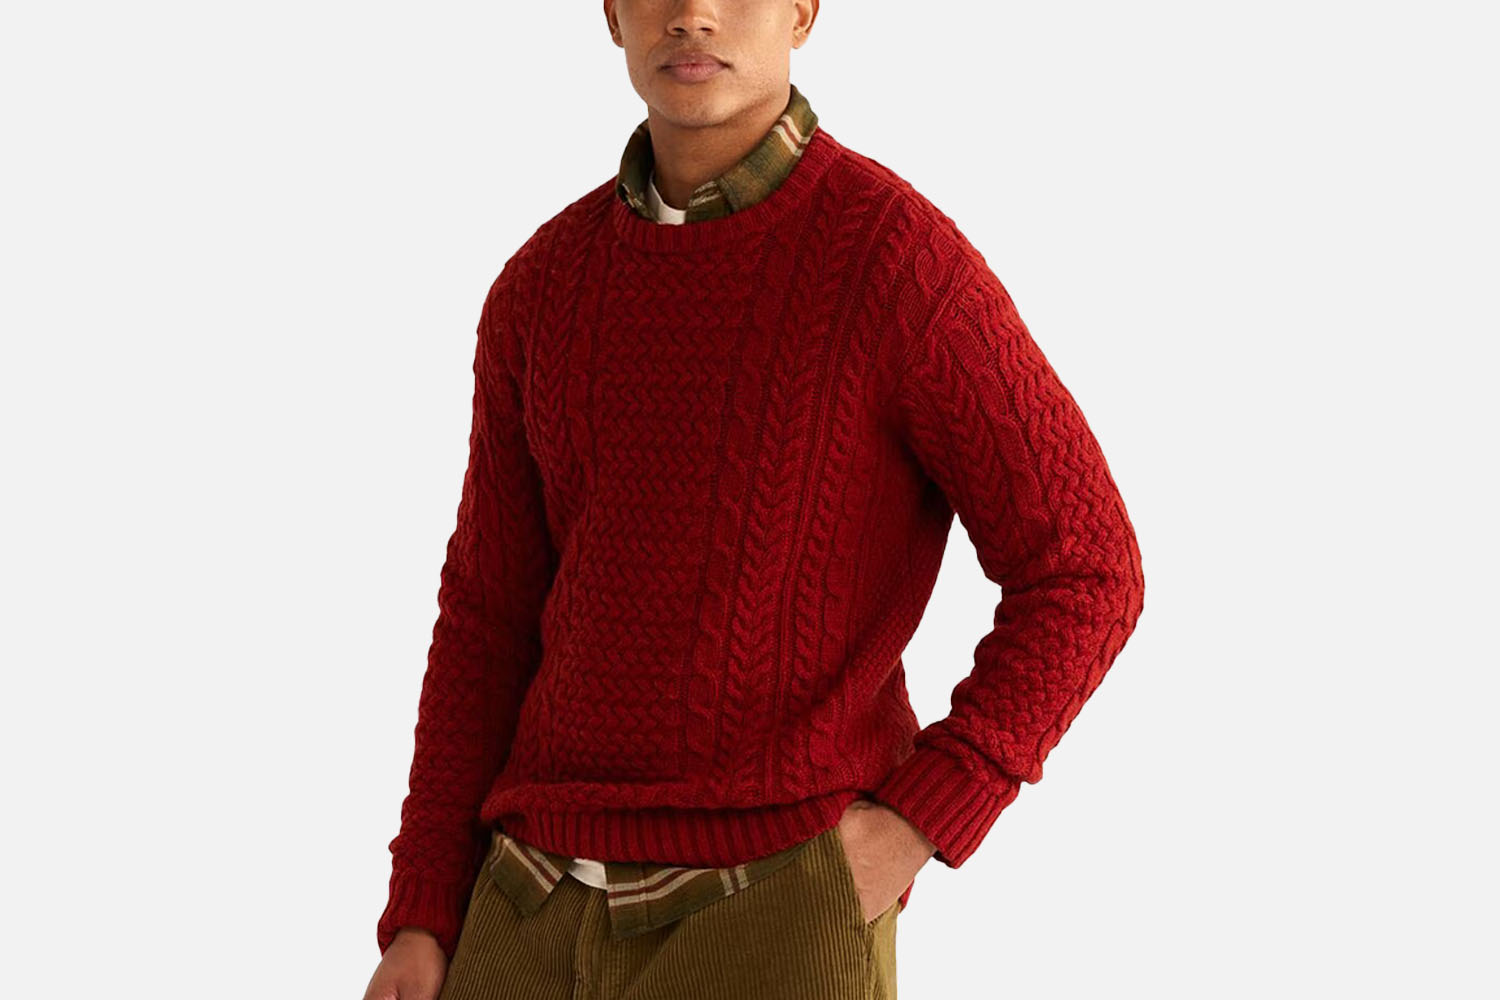 The Best Fisherman Sweaters for Men, According to Style Editors